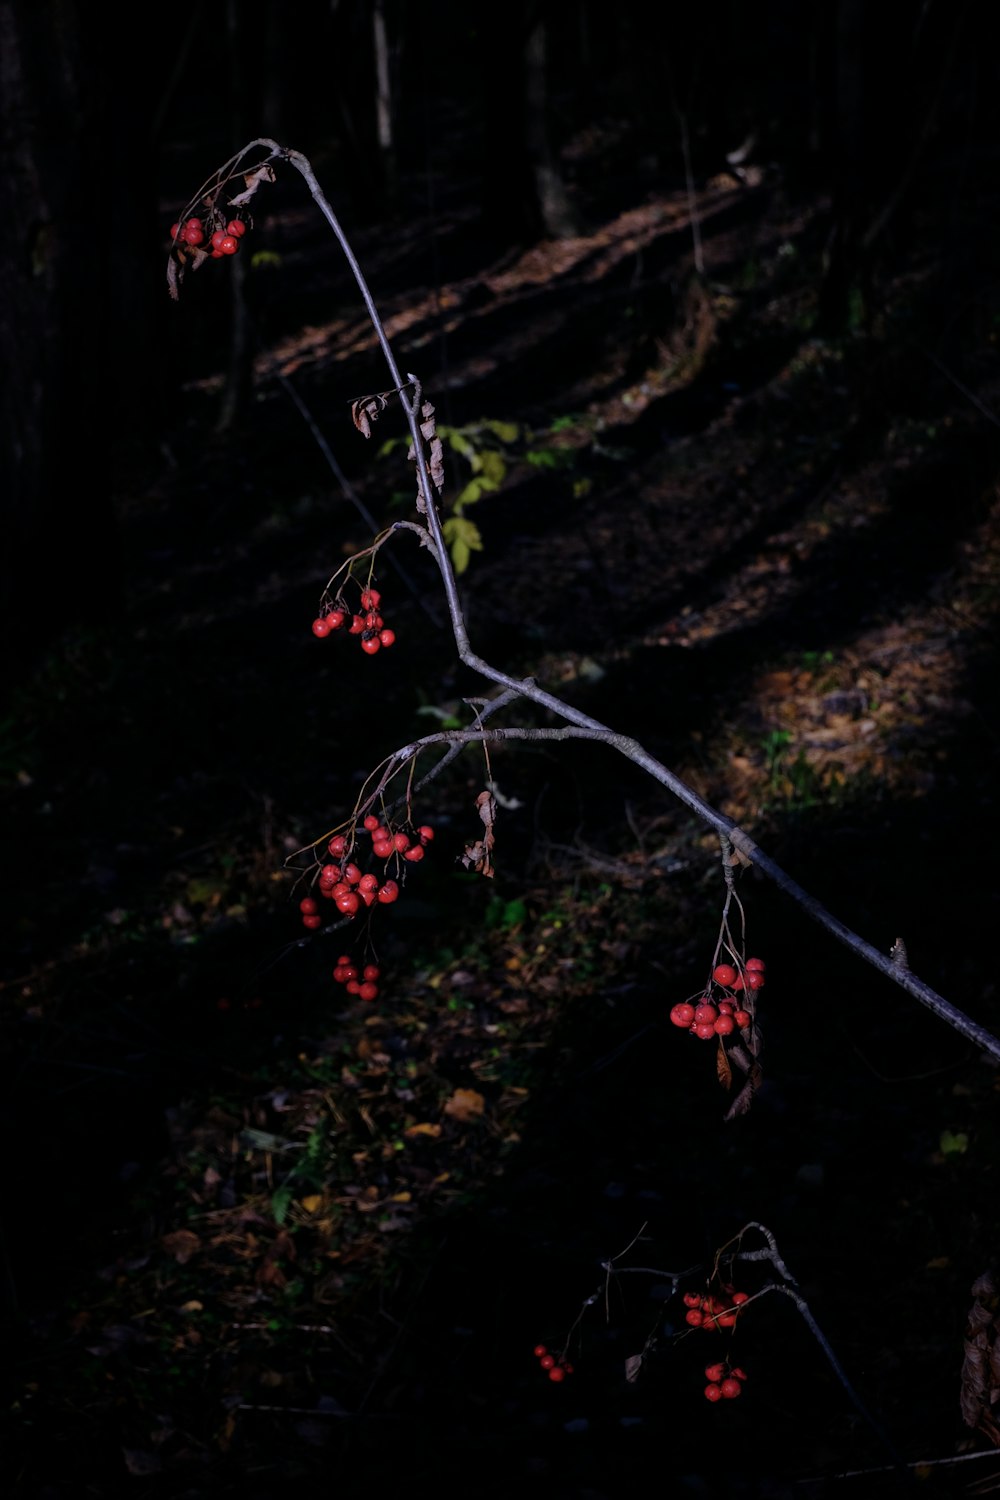 a tree branch with red berries growing on it